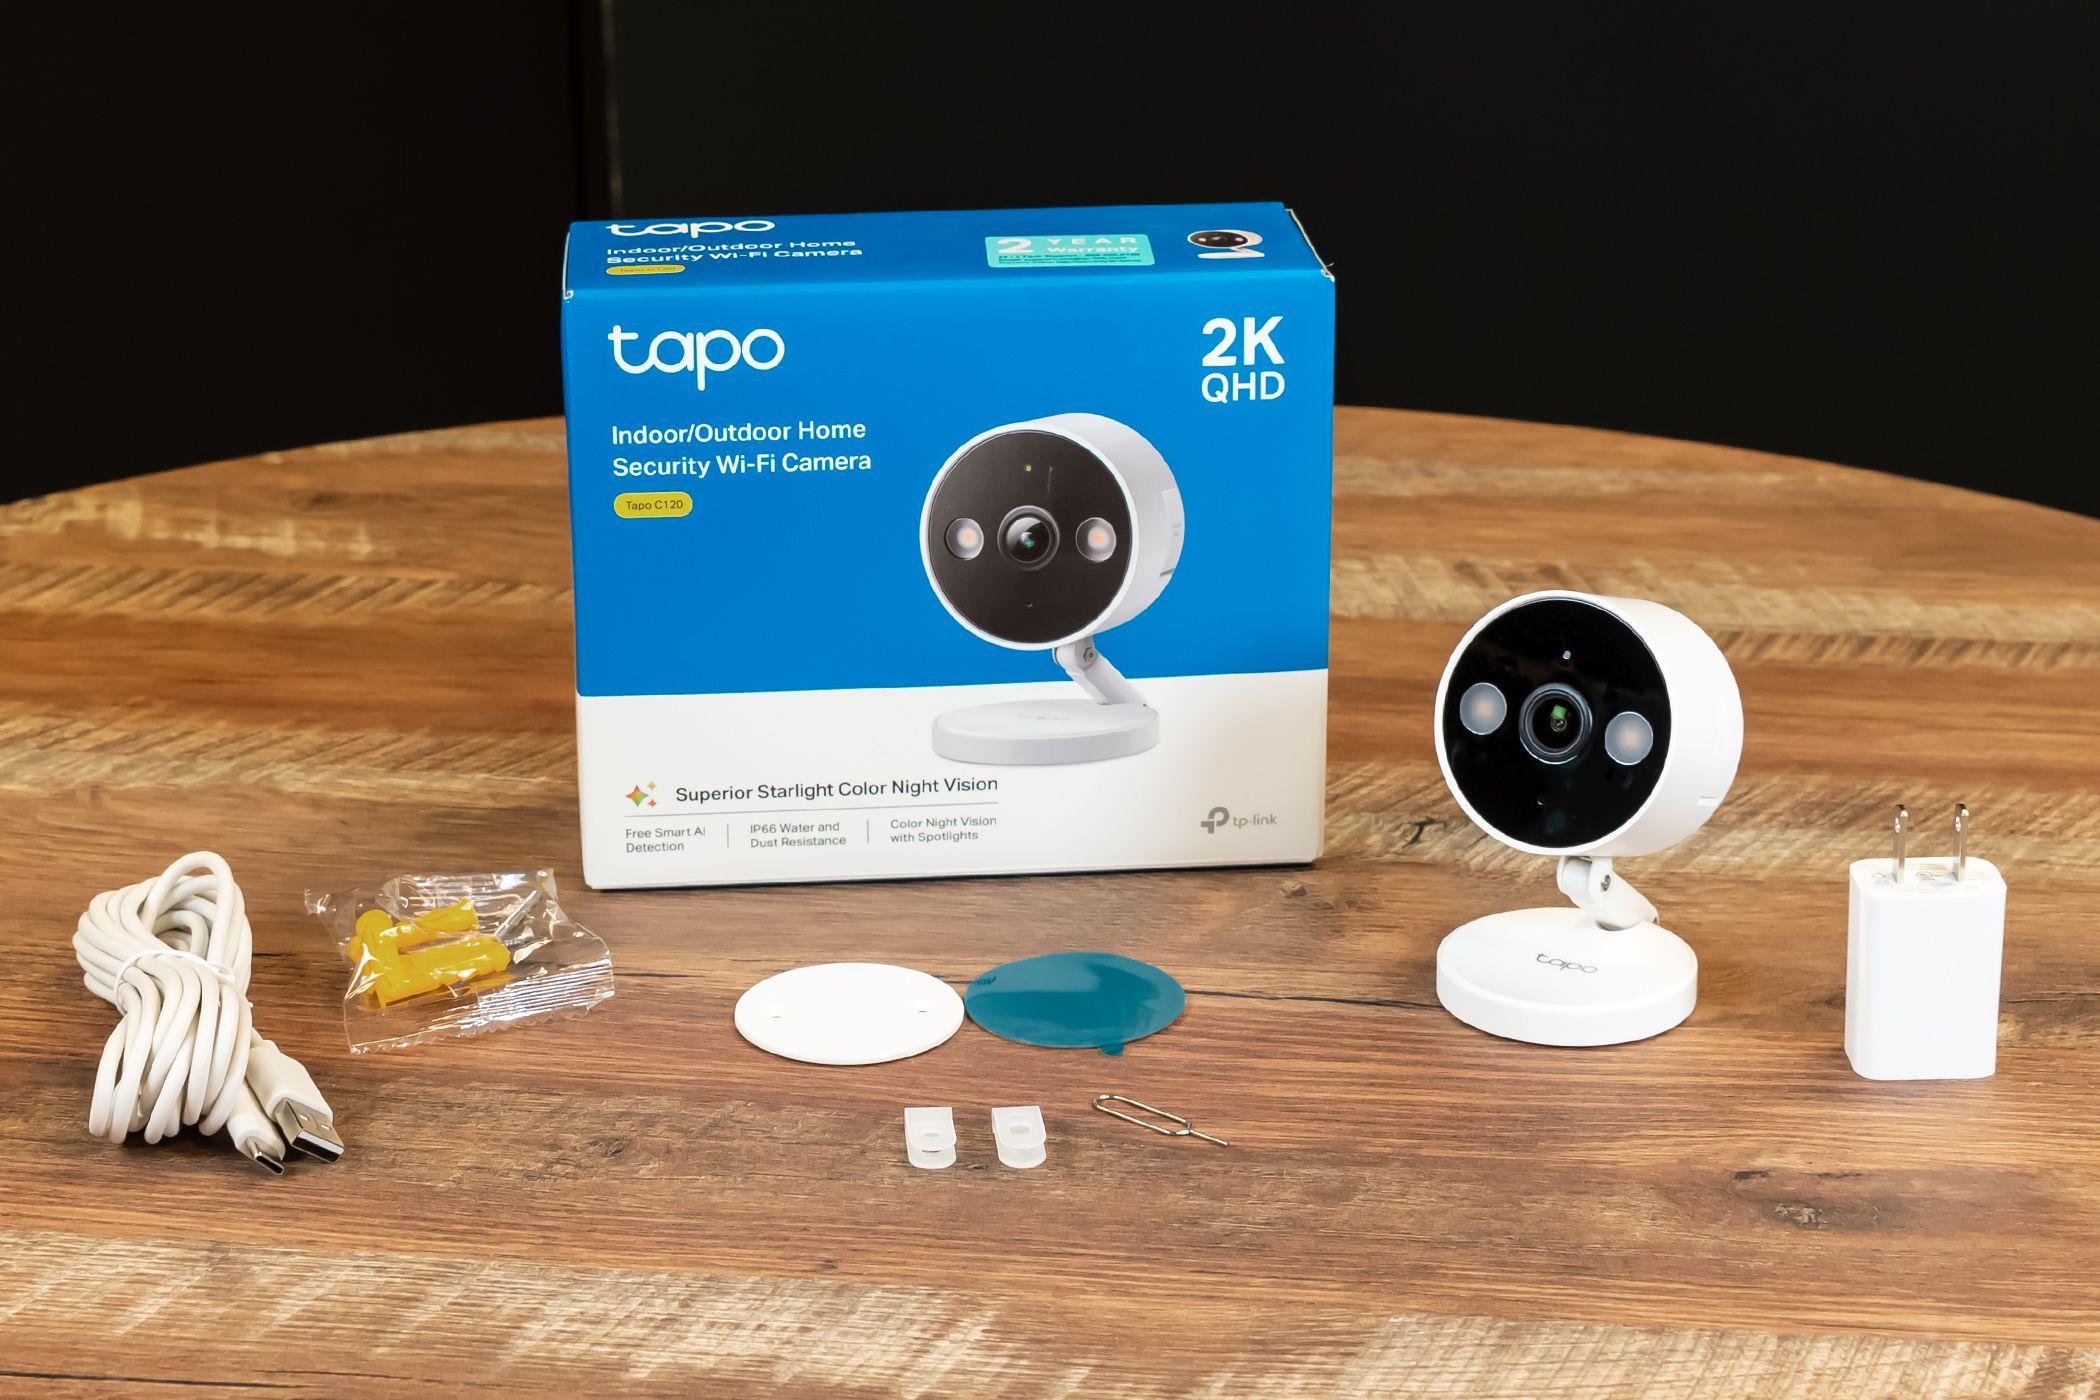 Tapo Security Camera Packaging with box, camera, charging accessories, and attachment hardware